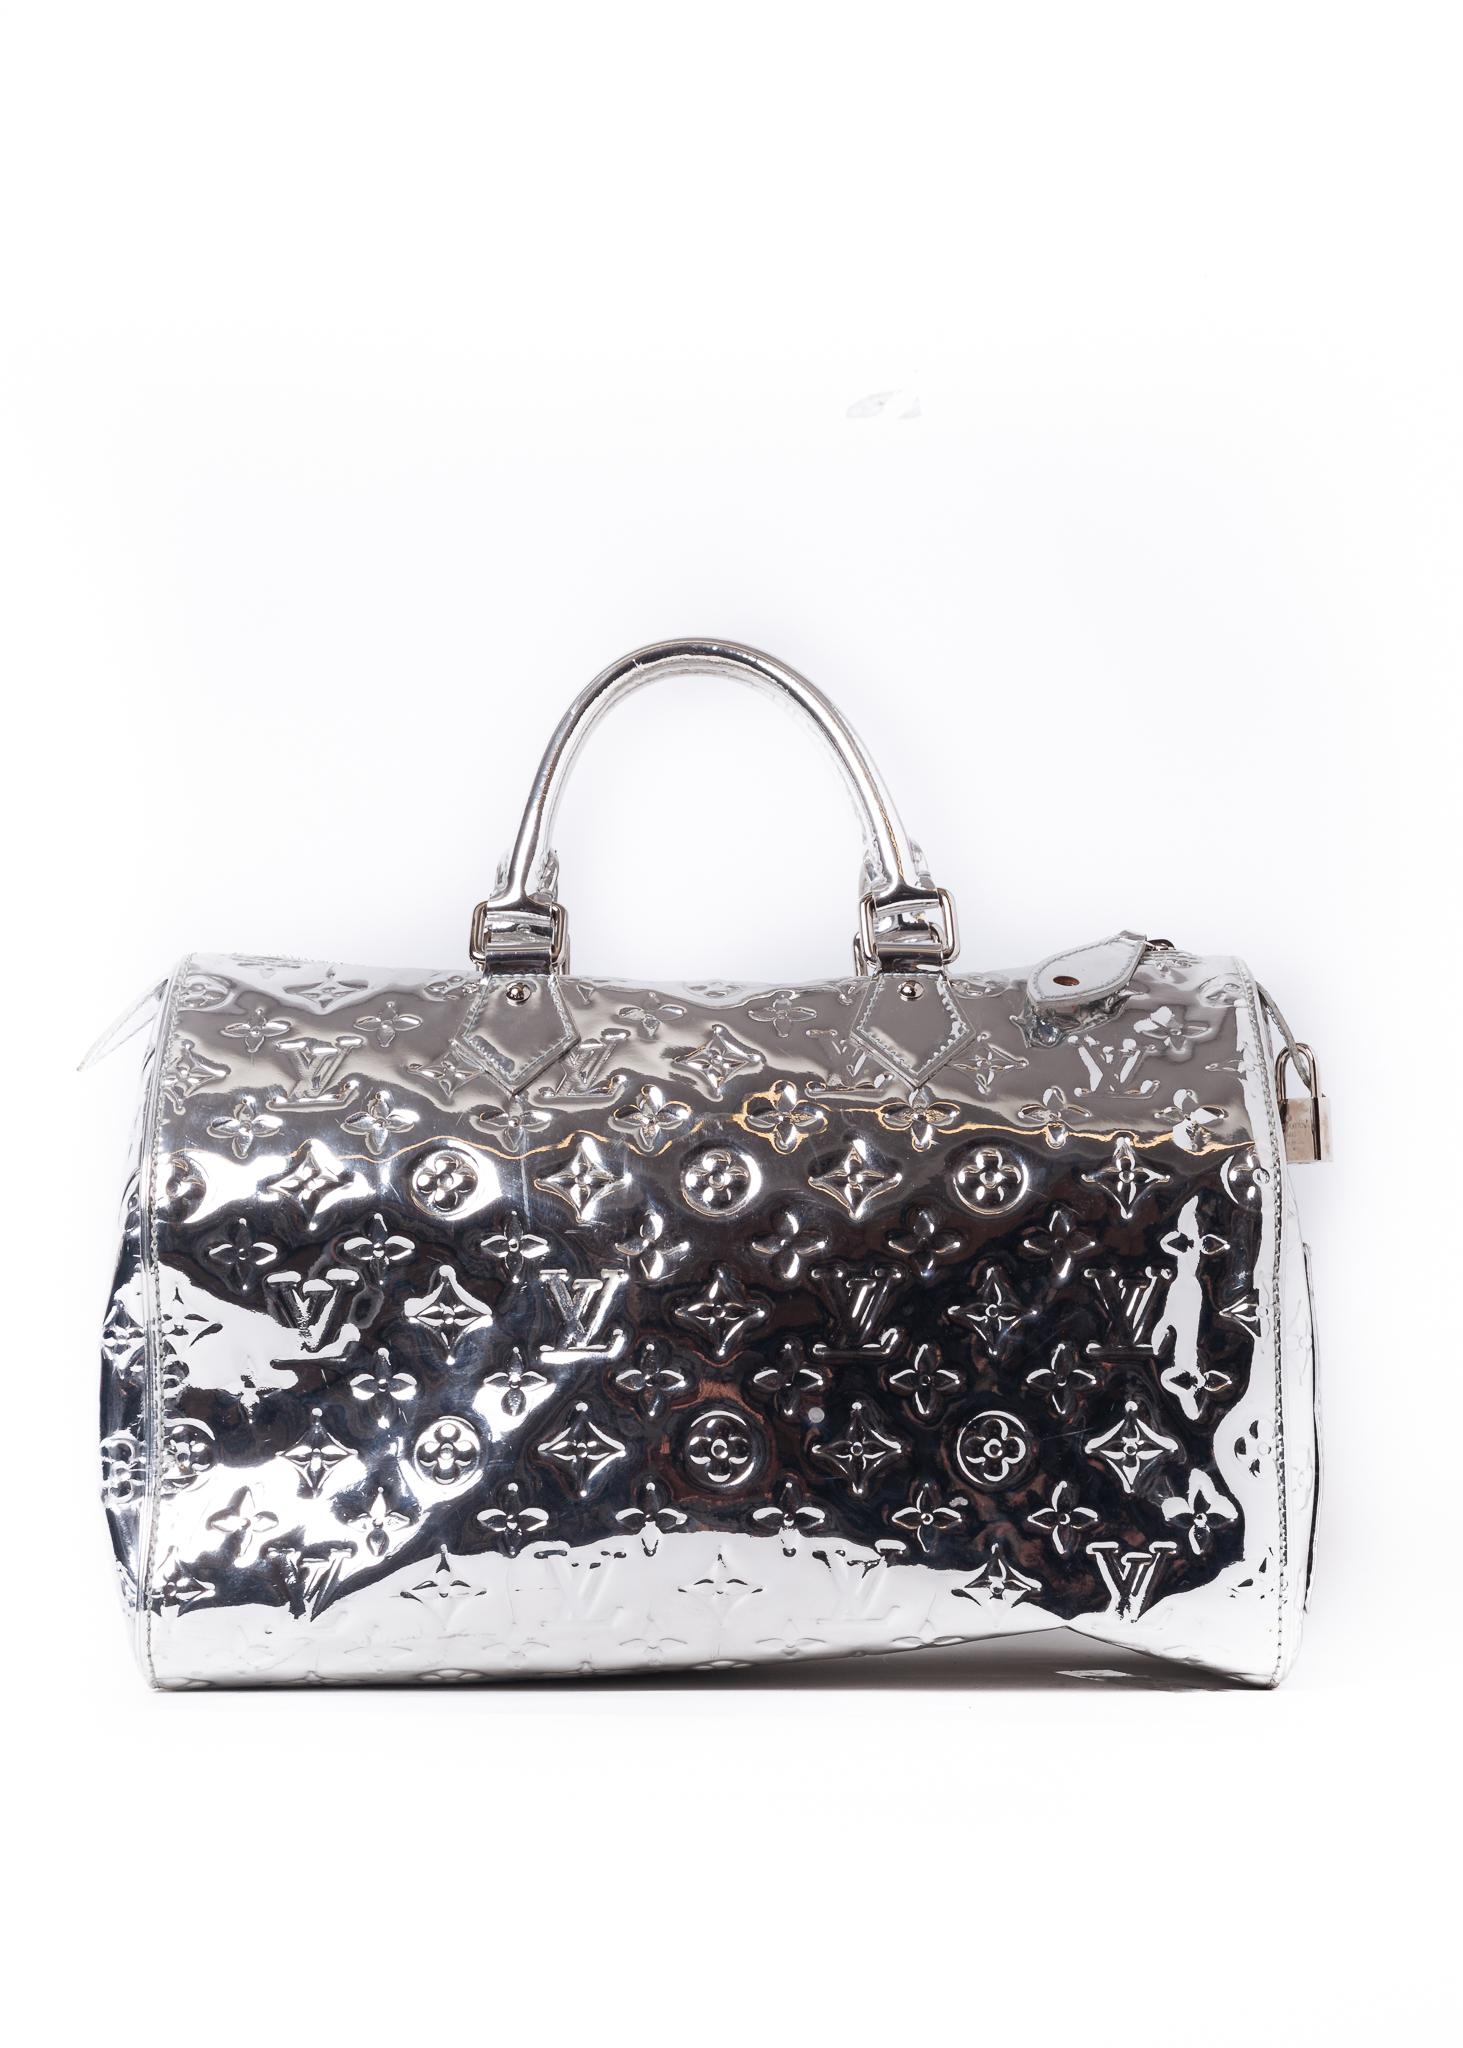 This limited edition Louis Vuitton Speedy 35 bag is made with a shiny silver monogram mirrored vinyl exterior with patent leather trim. This celebrity-coveted bag has woven fabric interior lining with two slip pockets.